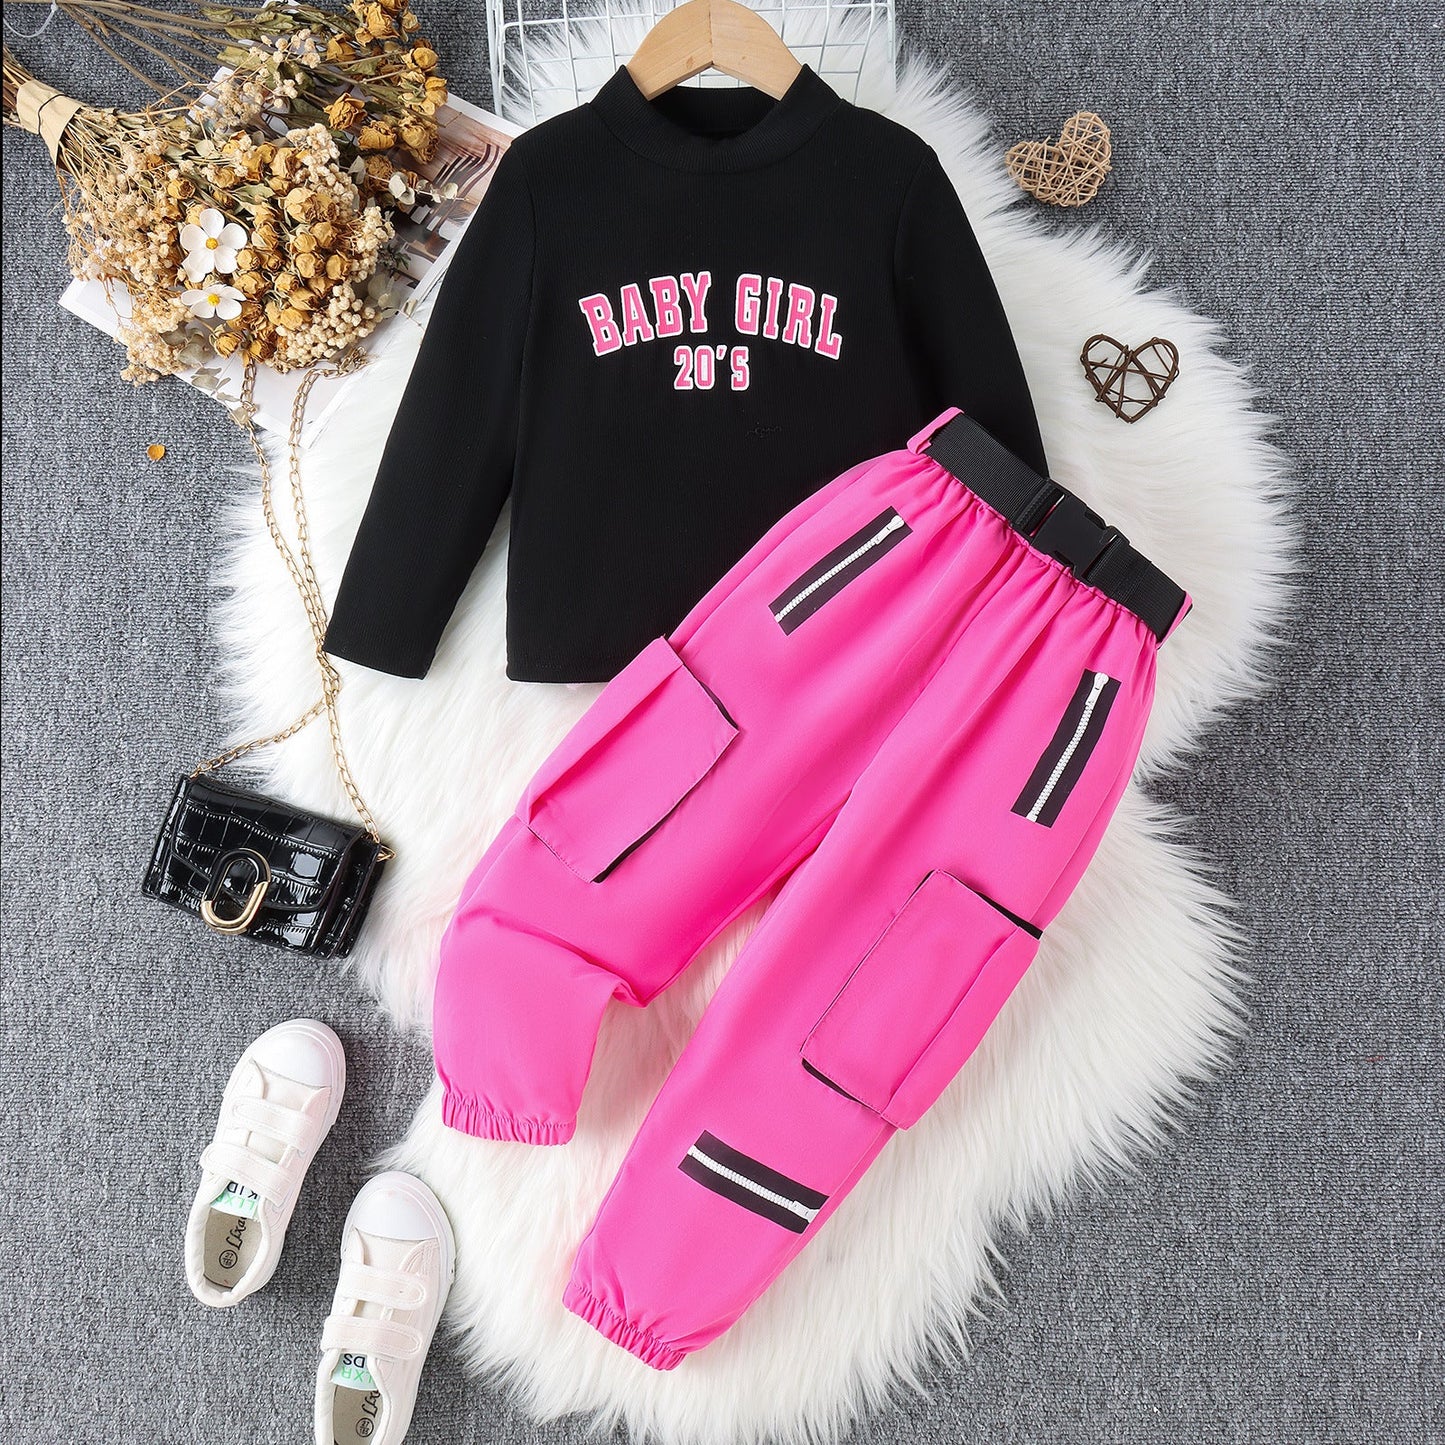 Winter High Collar Letters Printing Suit Autumn And Winter High Collar Letters Printing Suit J&E Discount Store 